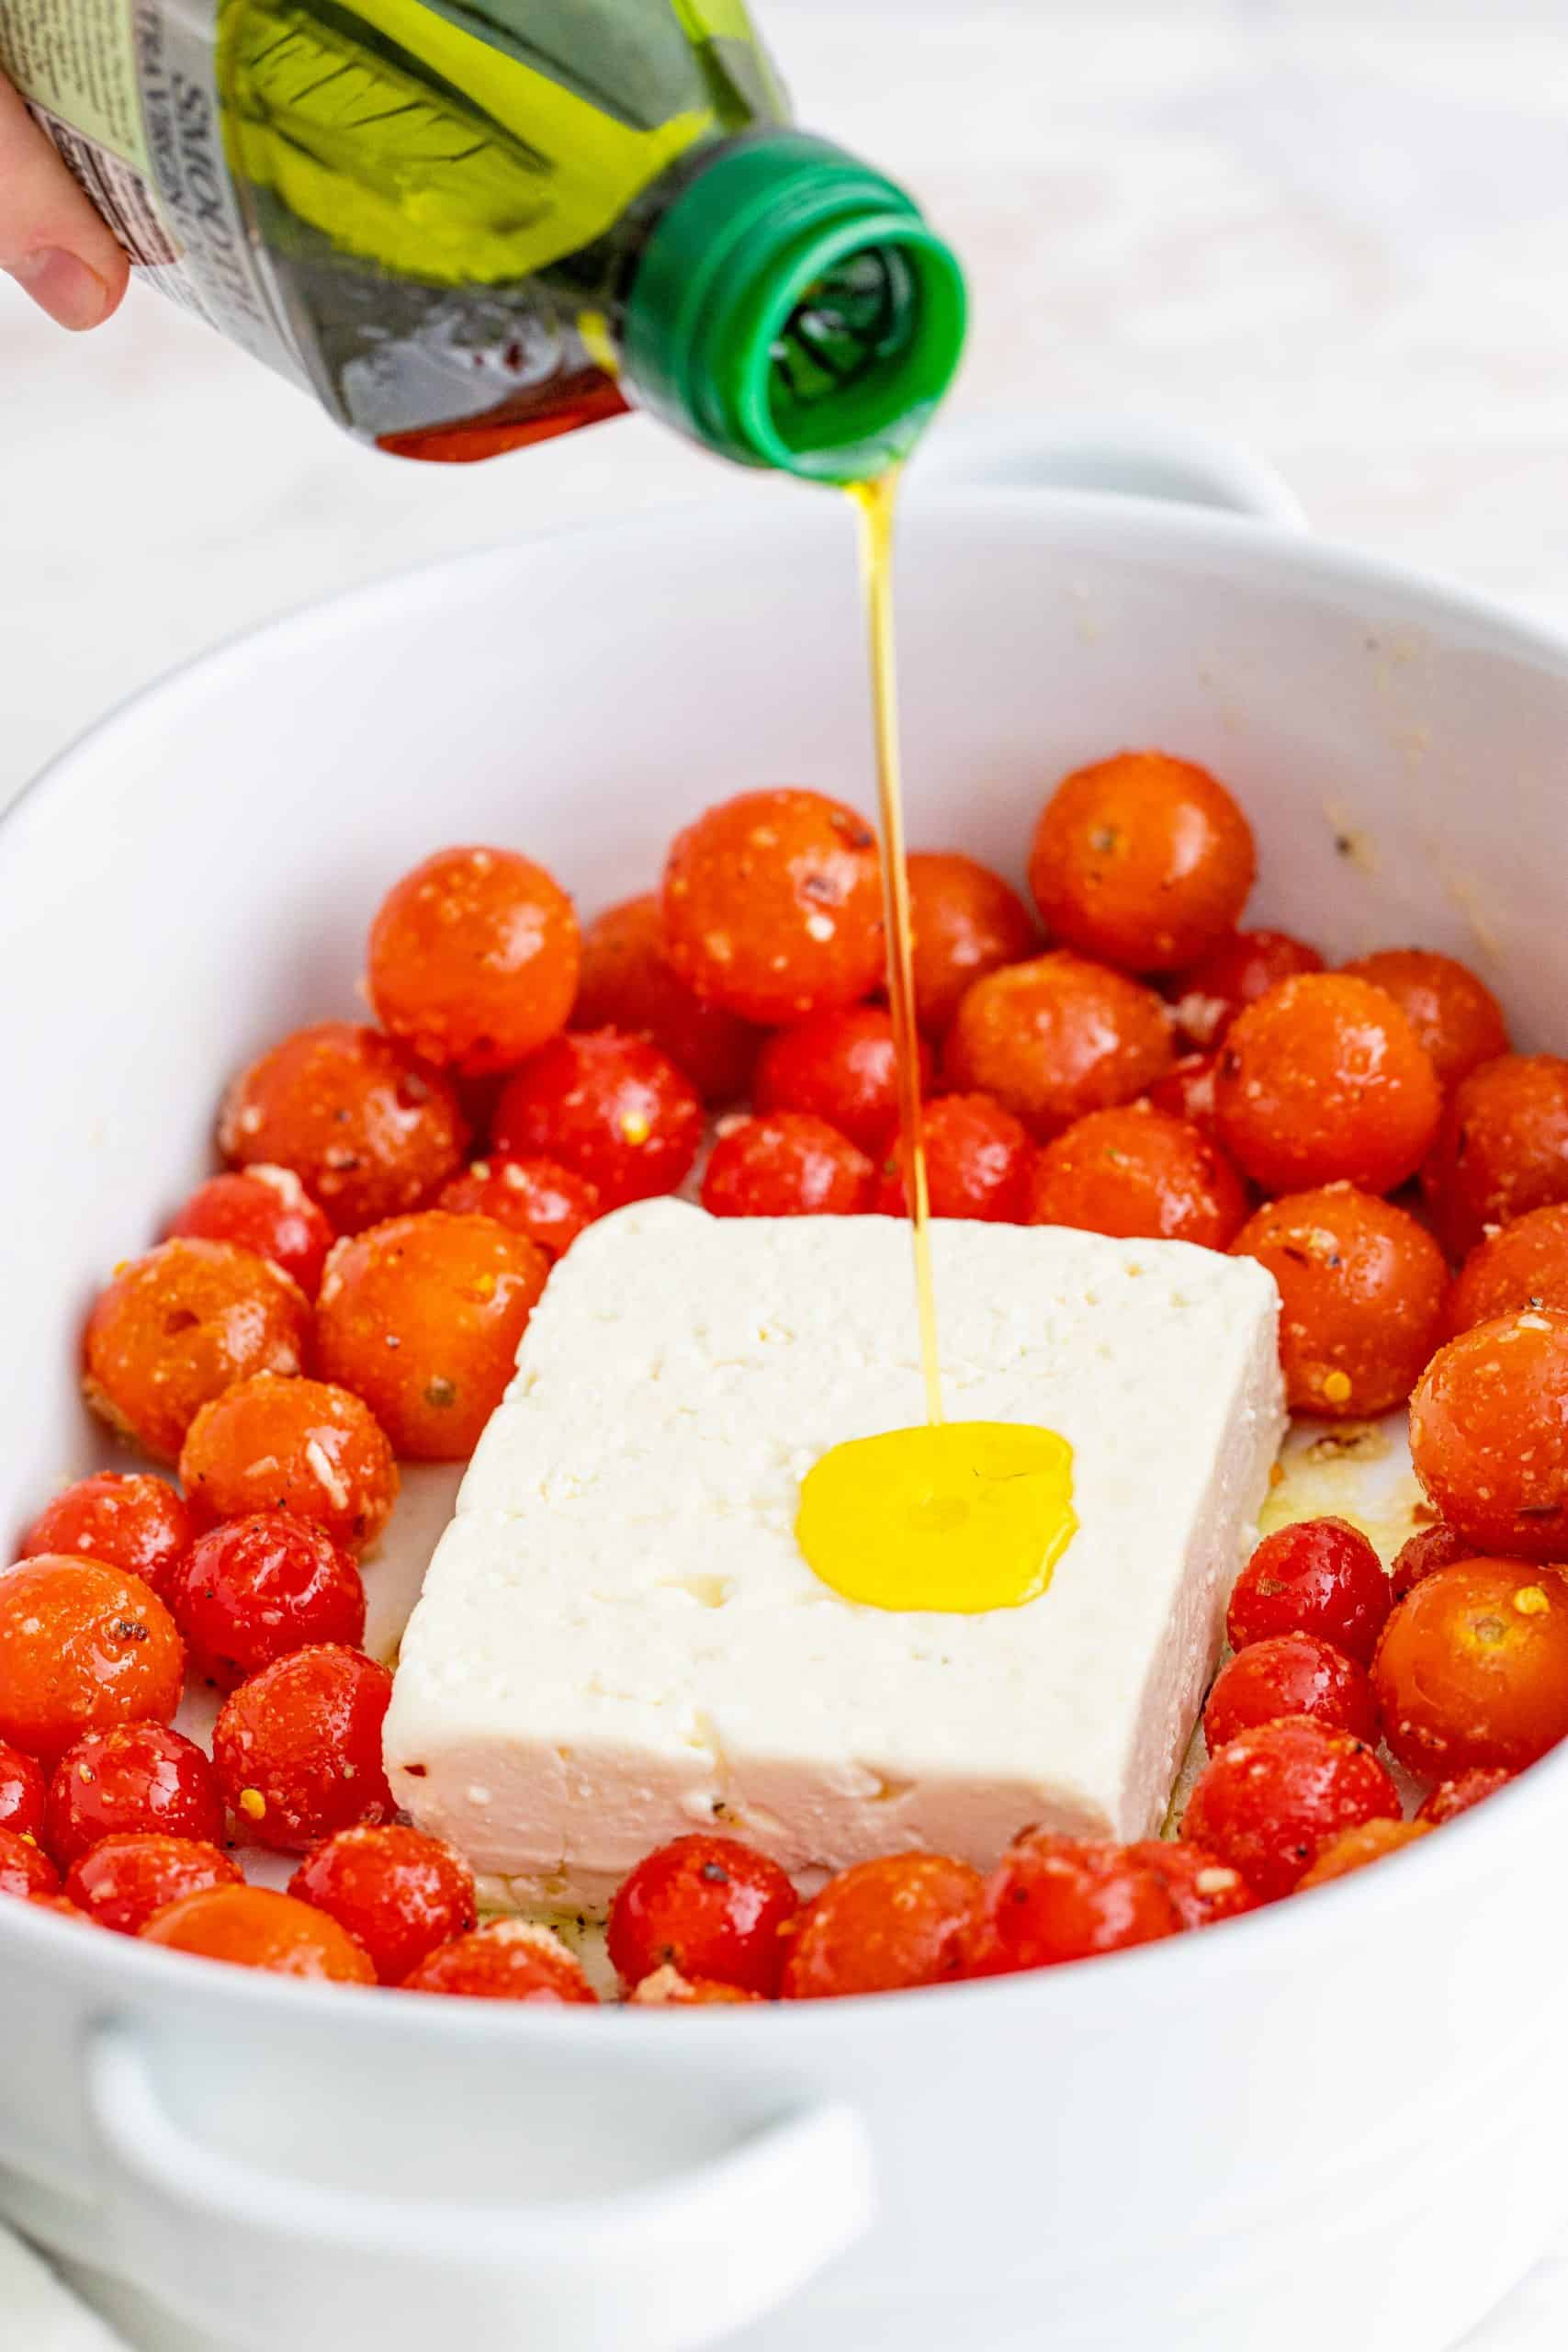 pouring olive oil on top of block of feta cheese and tomatoes in baking dish.